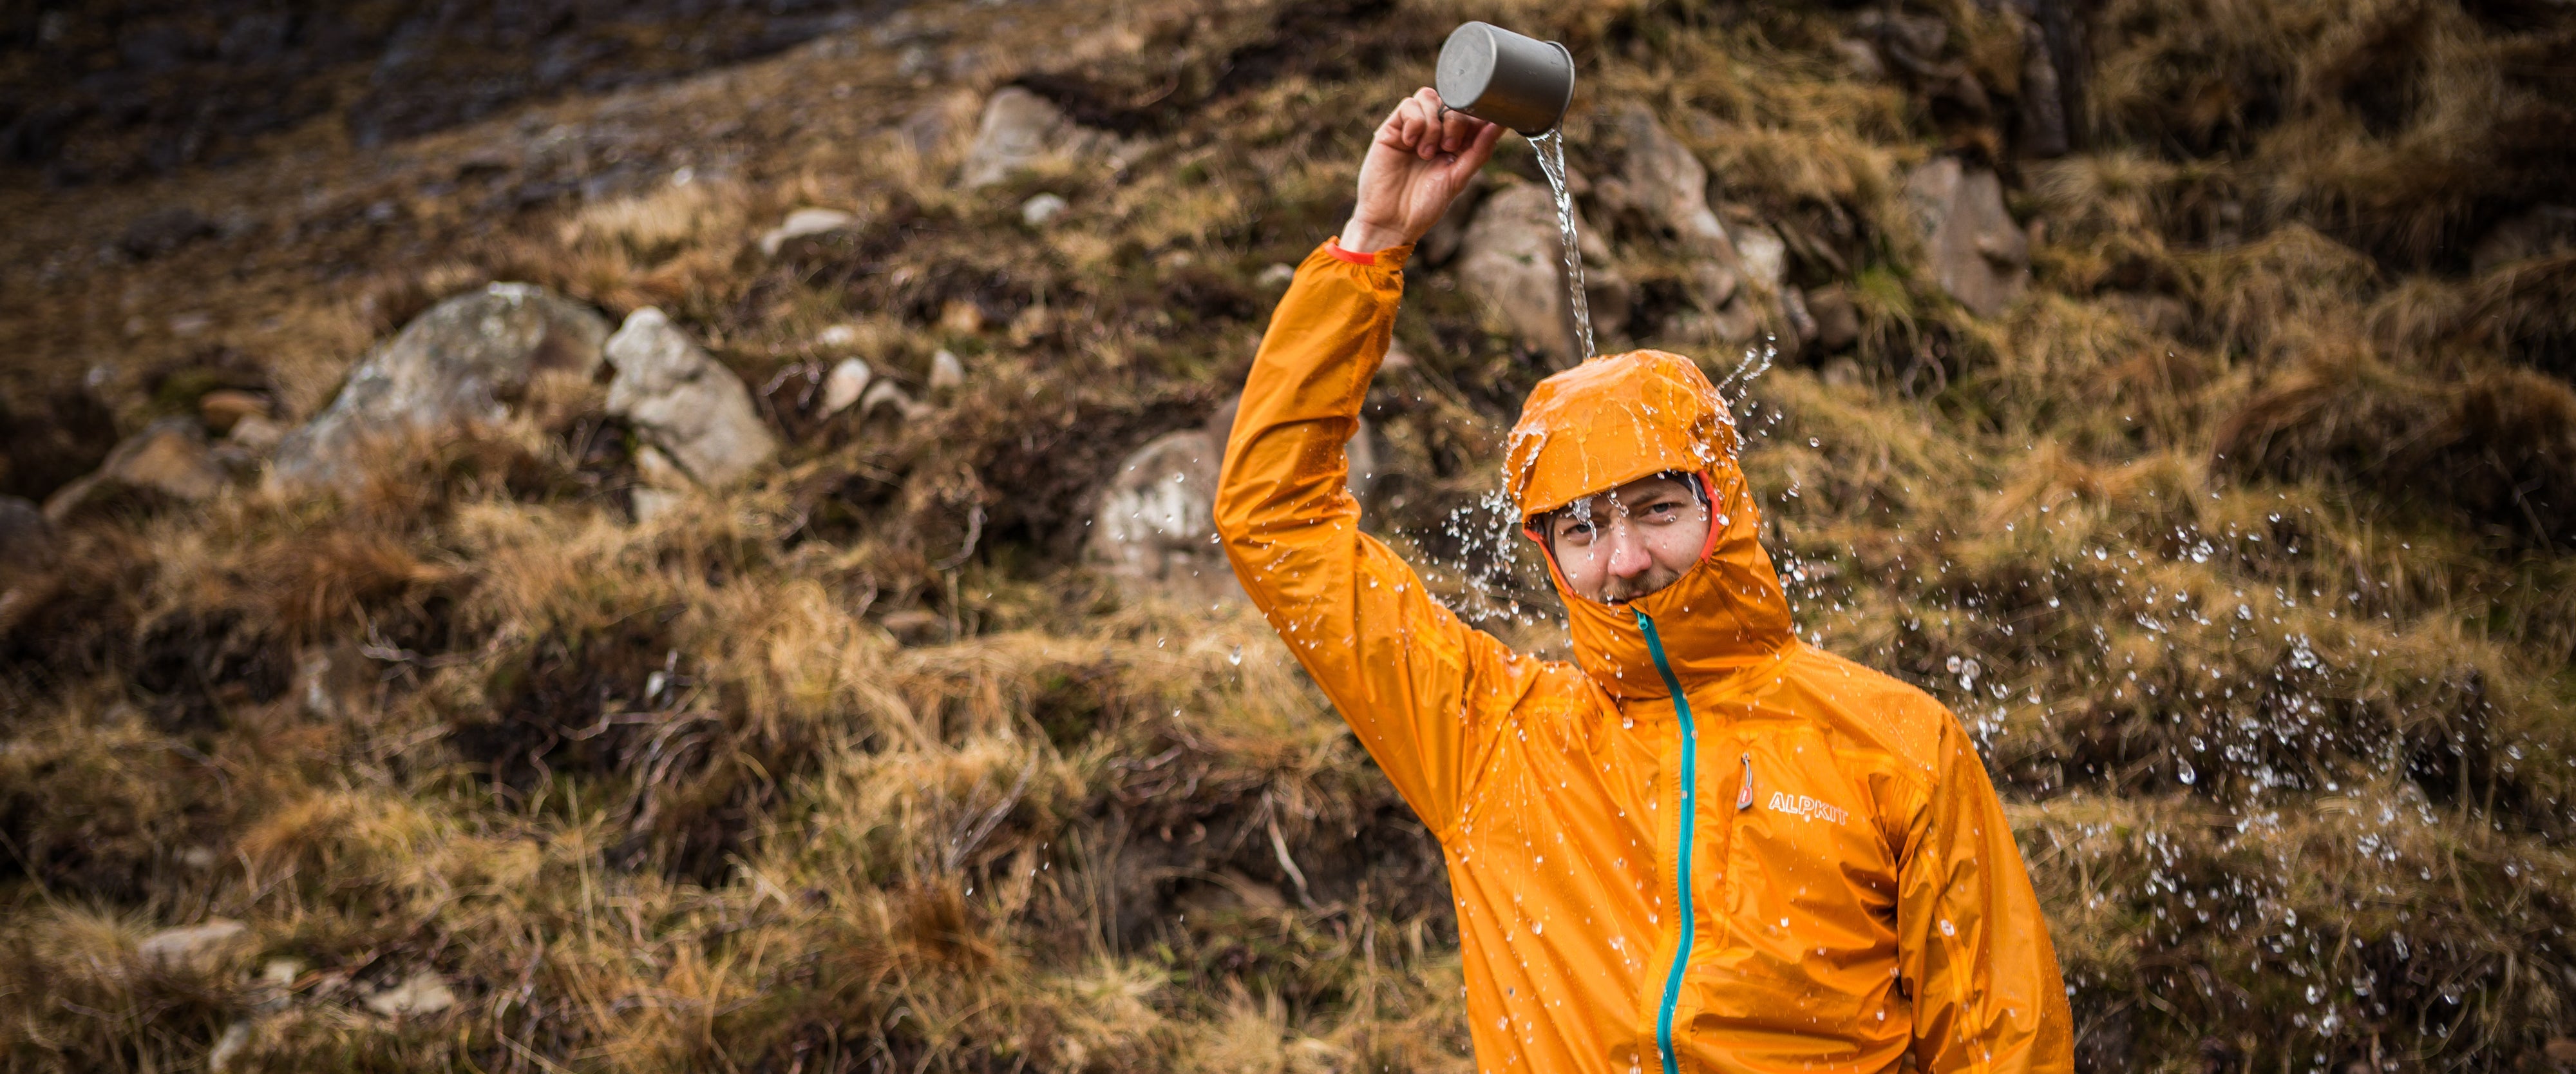 Waterproof coats - Waterproof and Breathability Ratings Explained